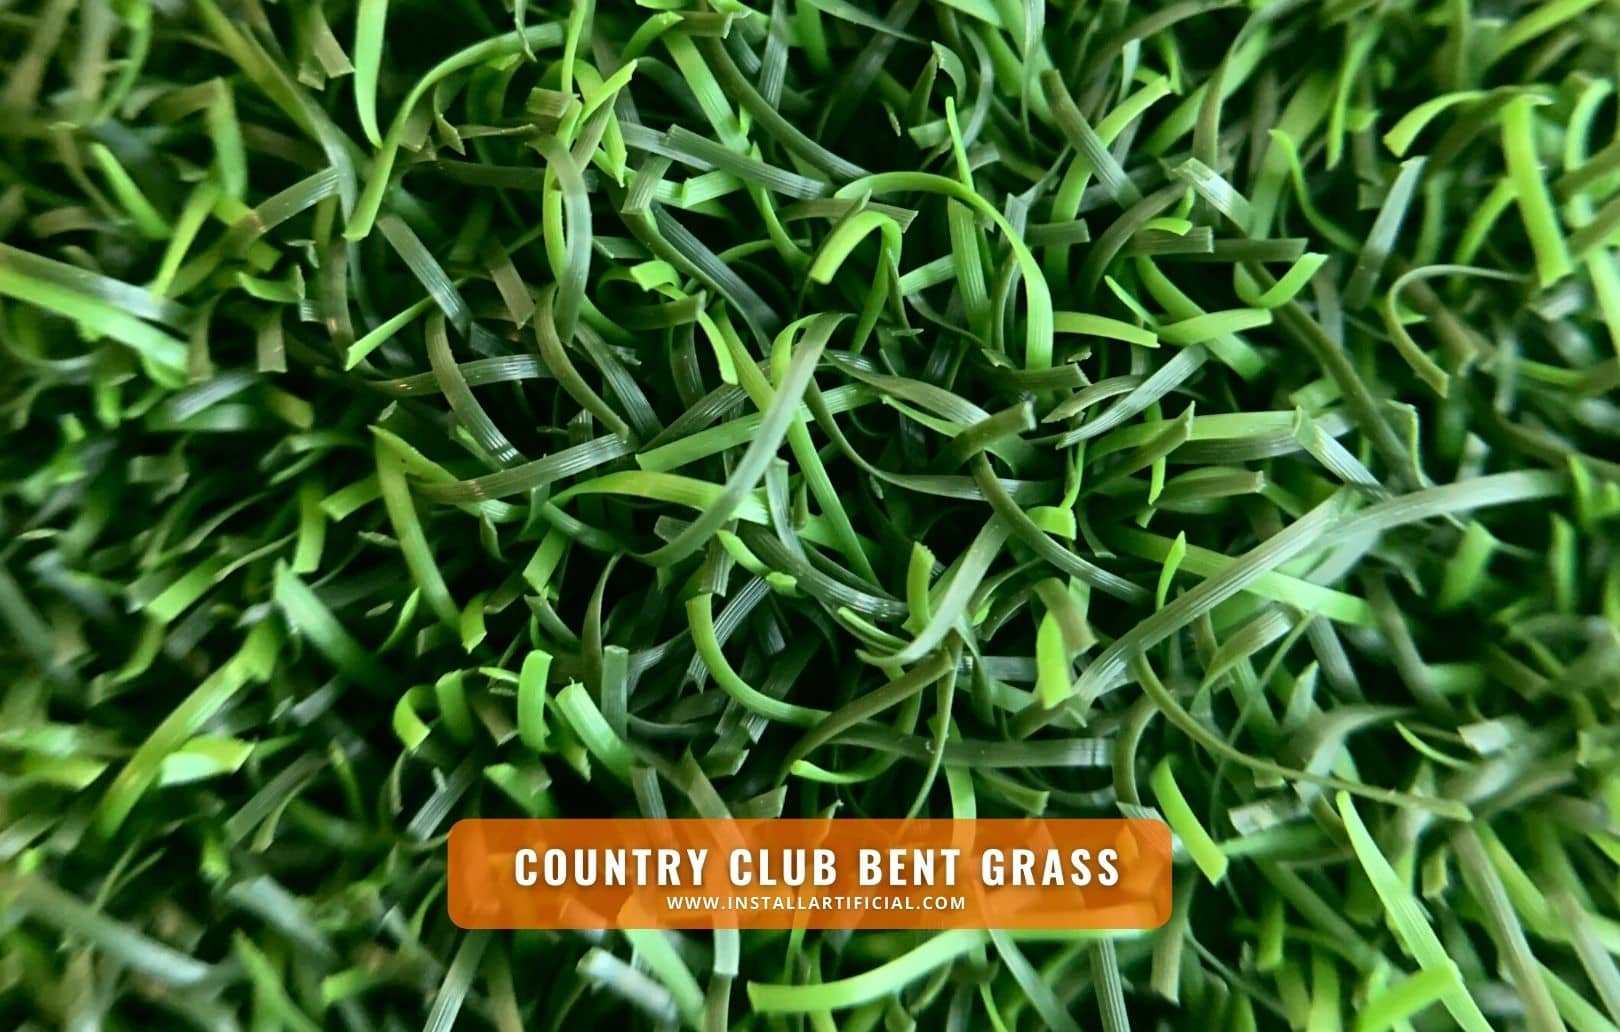 Country Club Bent Grass, Imperial Synthetic Turf, macro